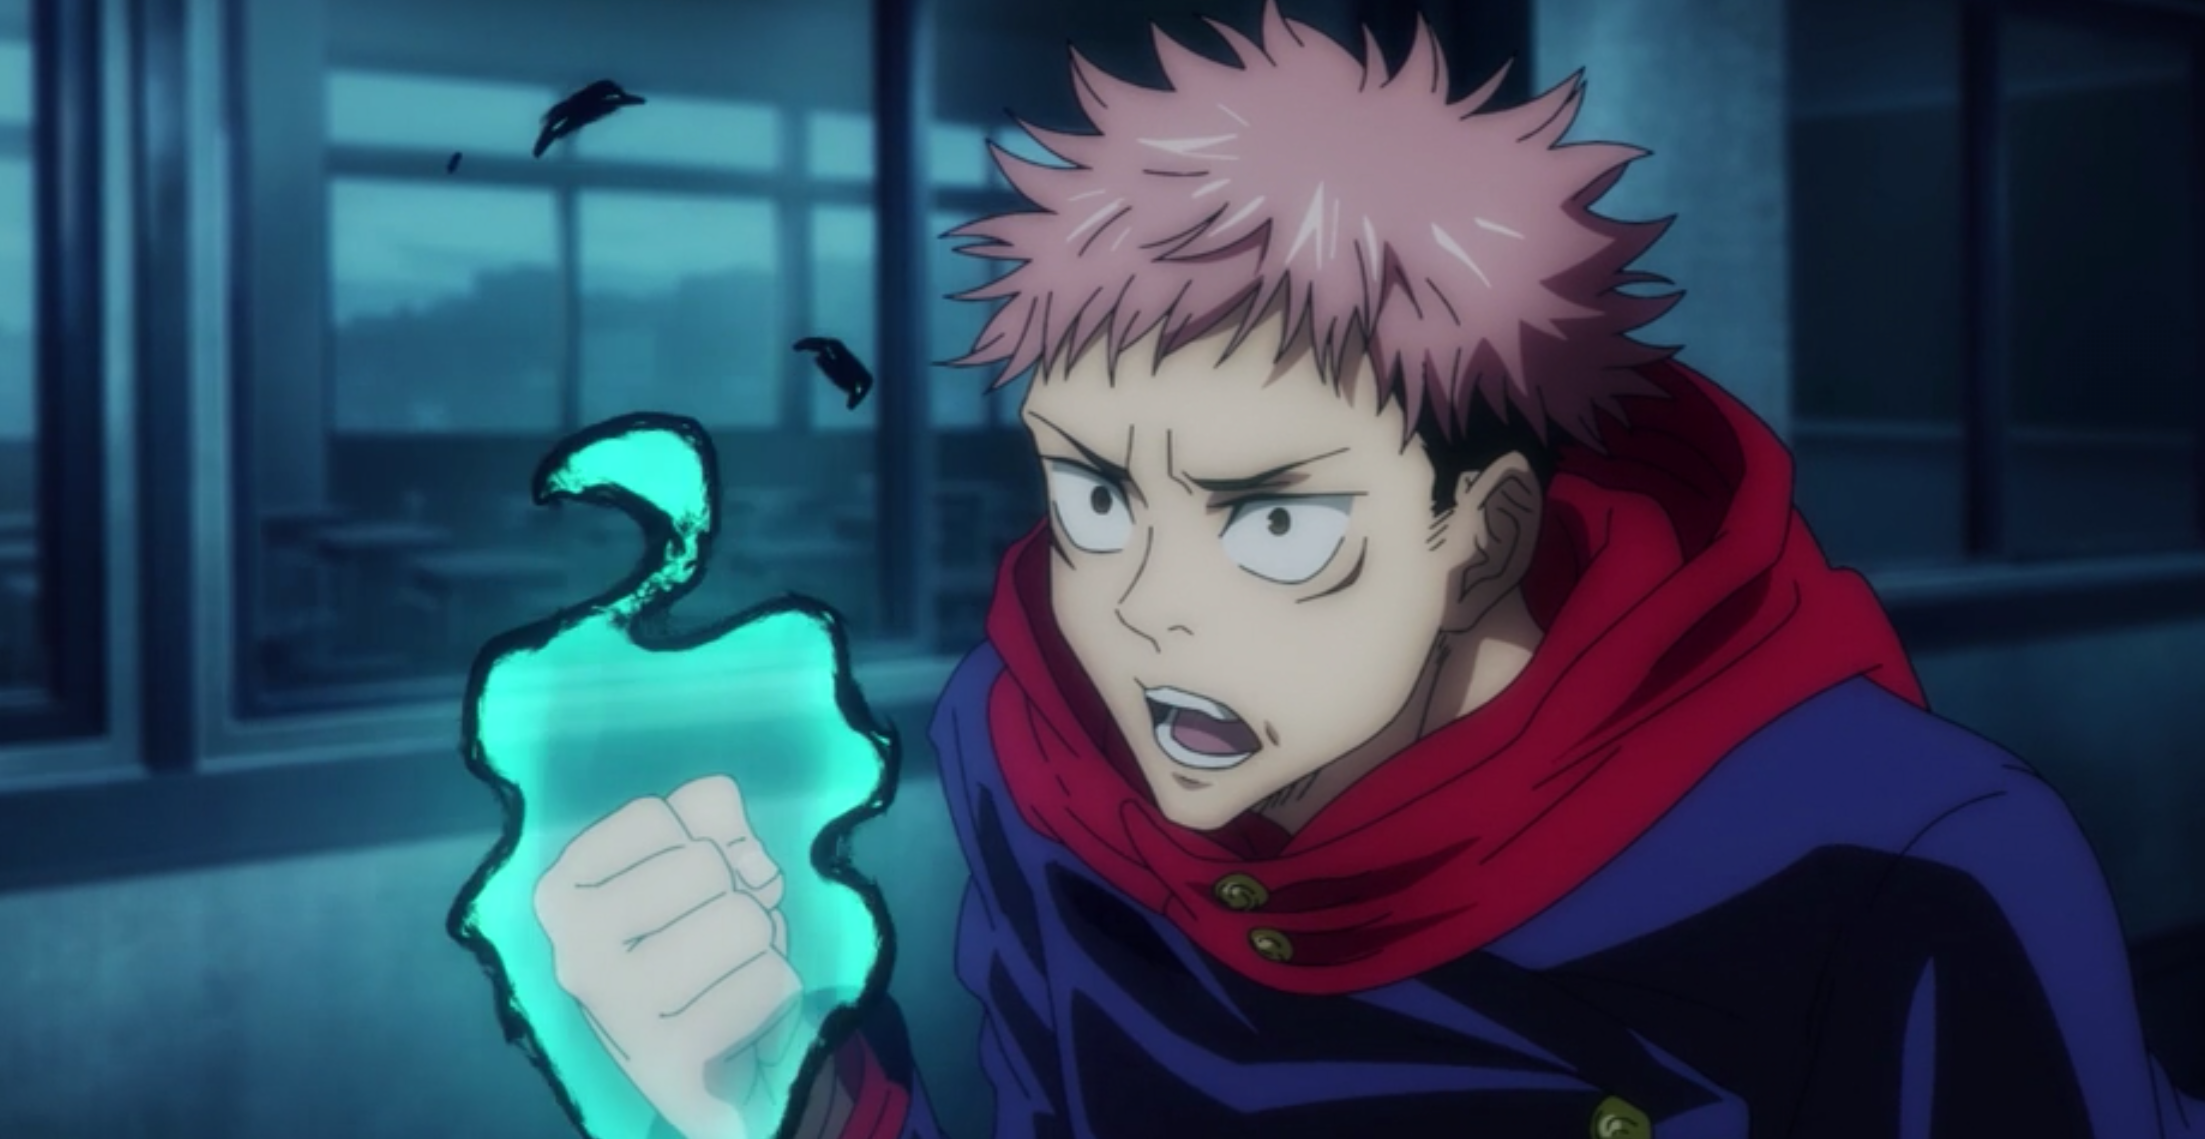 Jujutsu Kaisen: Why doesn't young Gojo wear a blindfold? - Dexerto